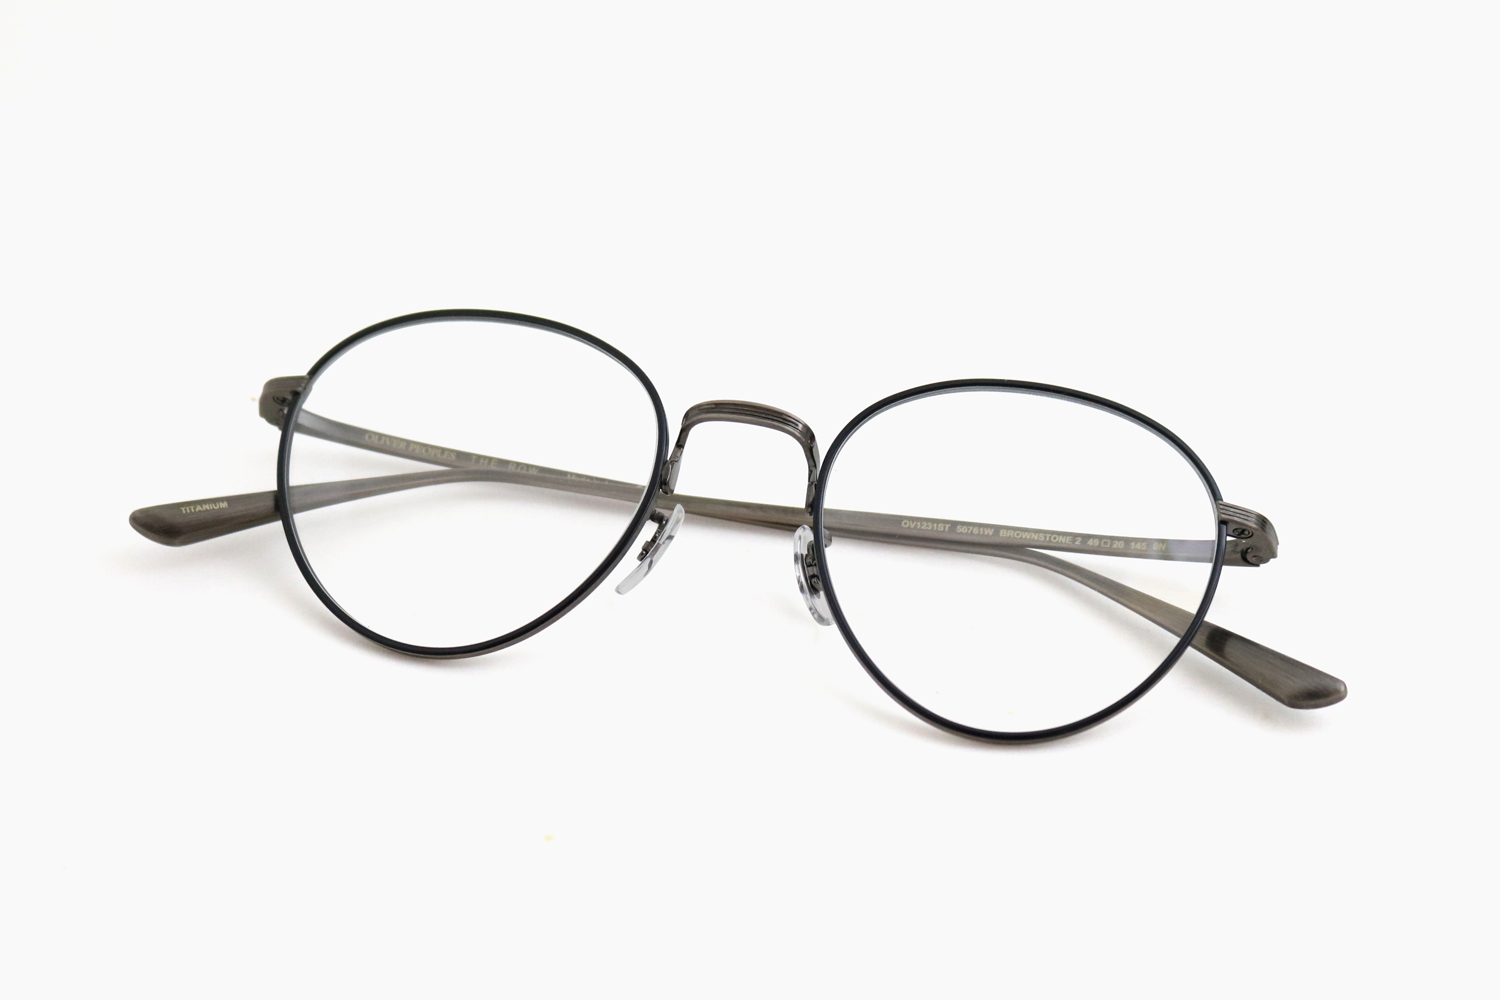 OLIVER PEOPLES THE ROW BROWNSTONE 2 - starrvybzonline.com